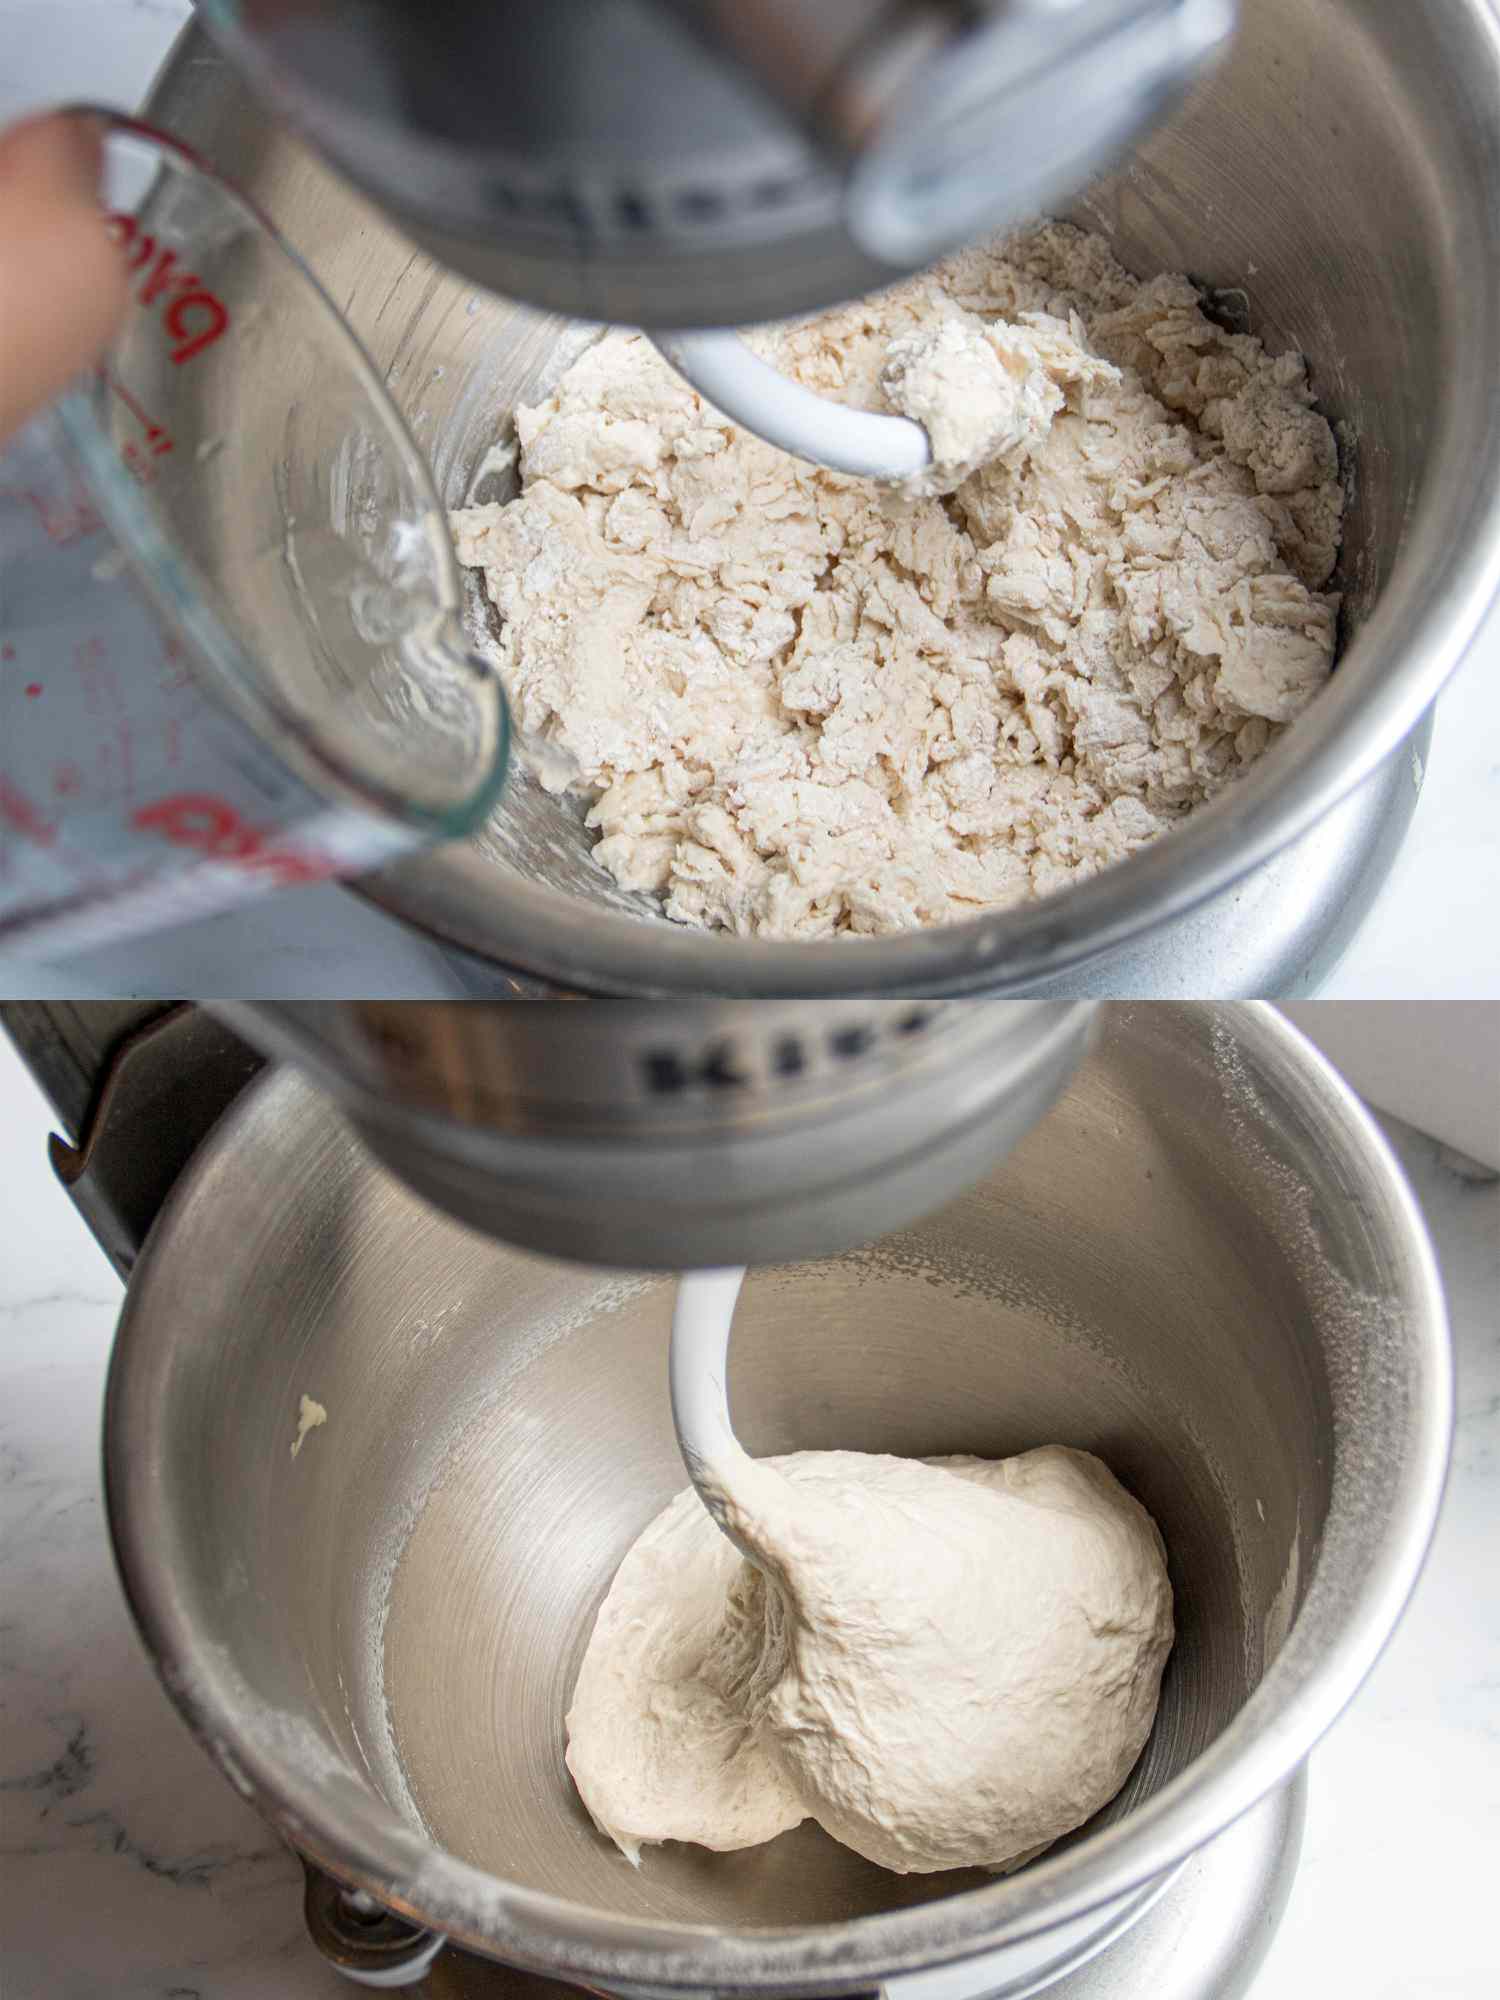 Two image collage of adding yeast mixture to flour in stand mixer and dough formed in bowl